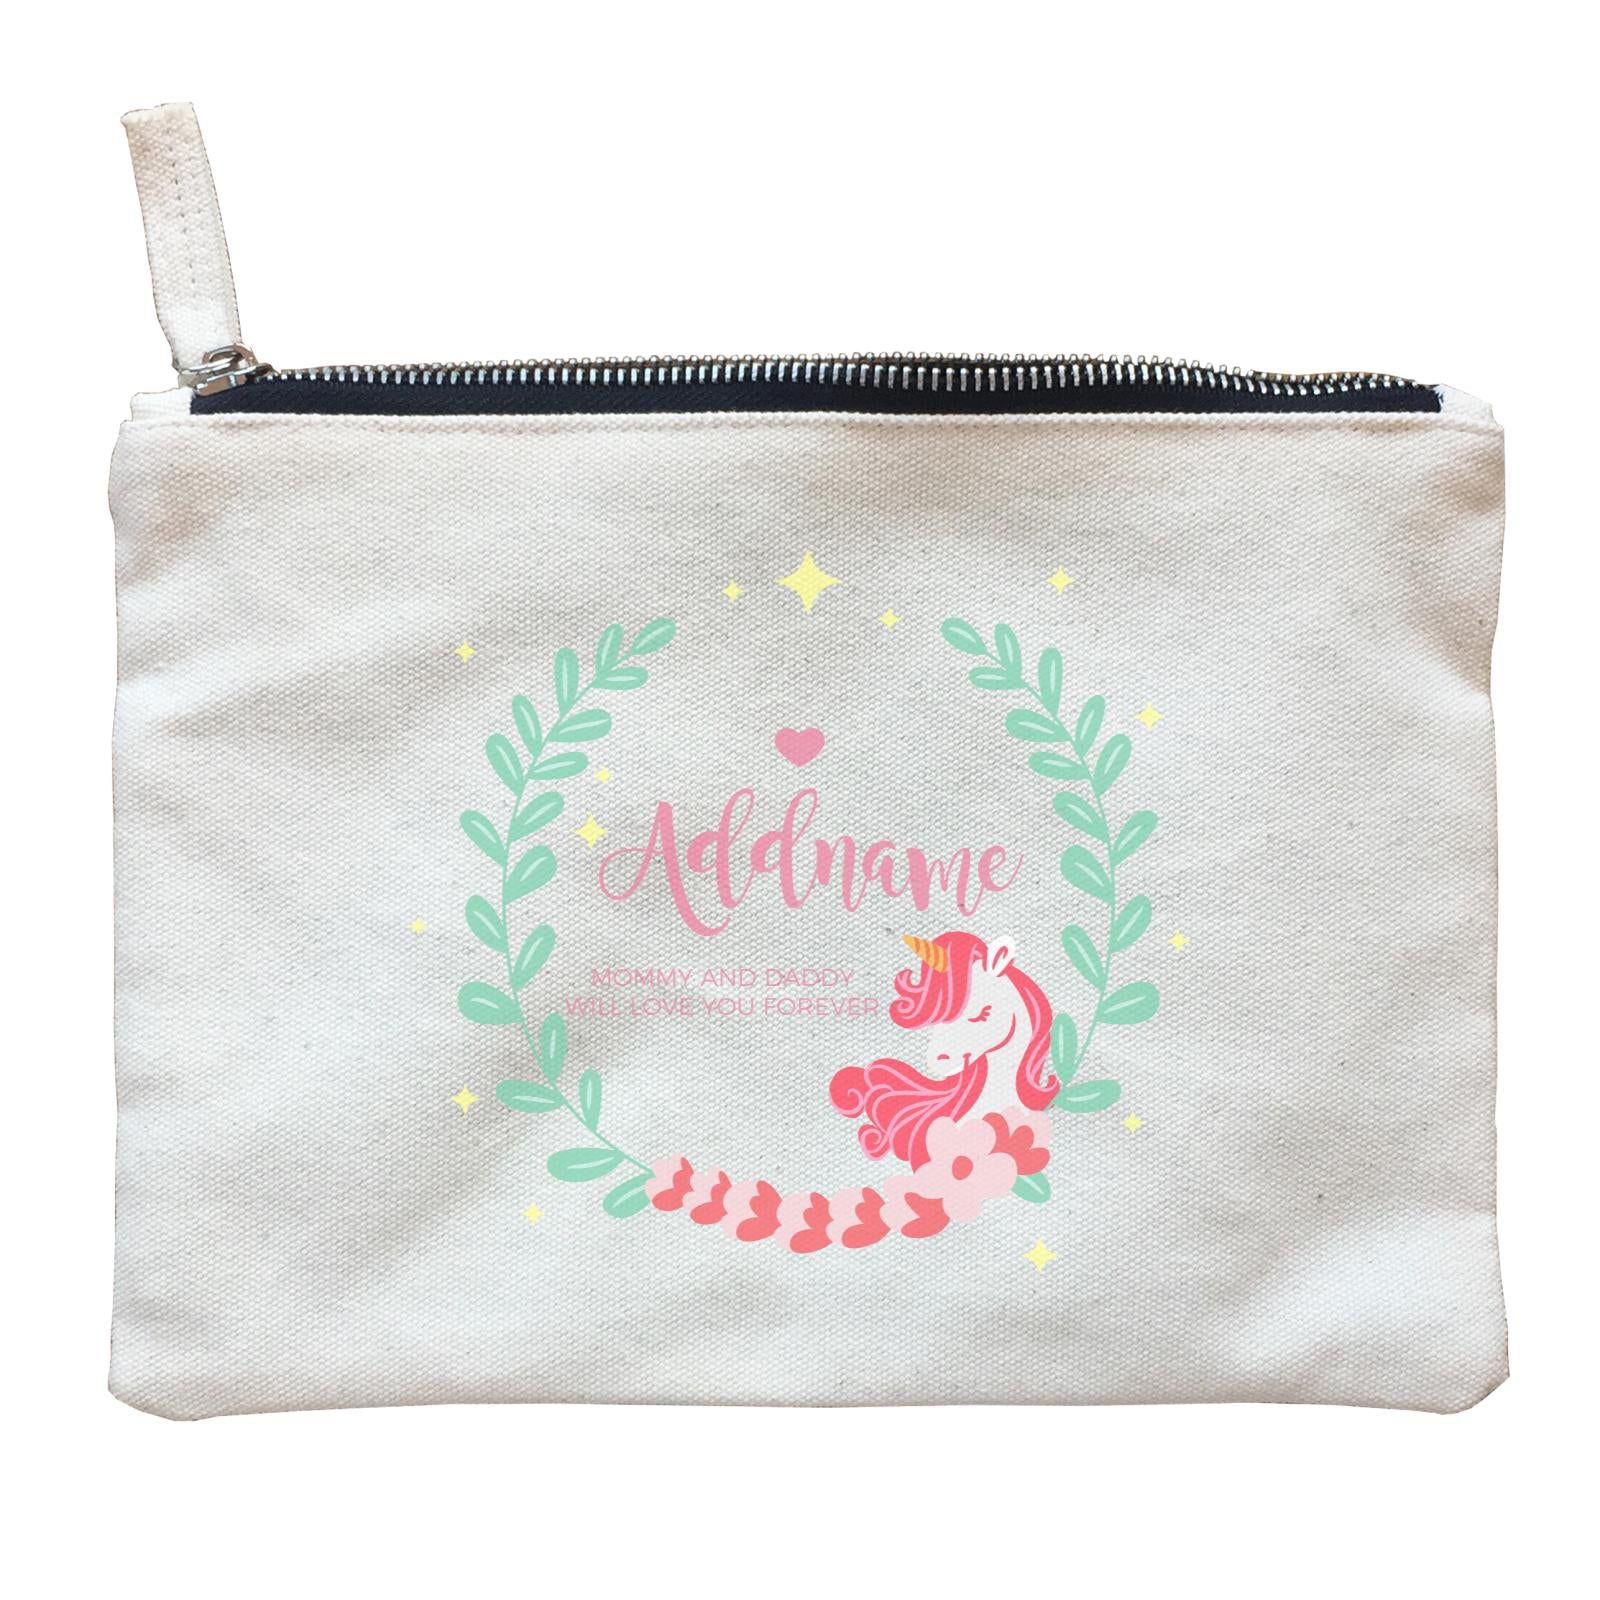 Cute Pink Unicorn with Pastel Green Leaves Wreath Personalizable with Name and Text Zipper Pouch